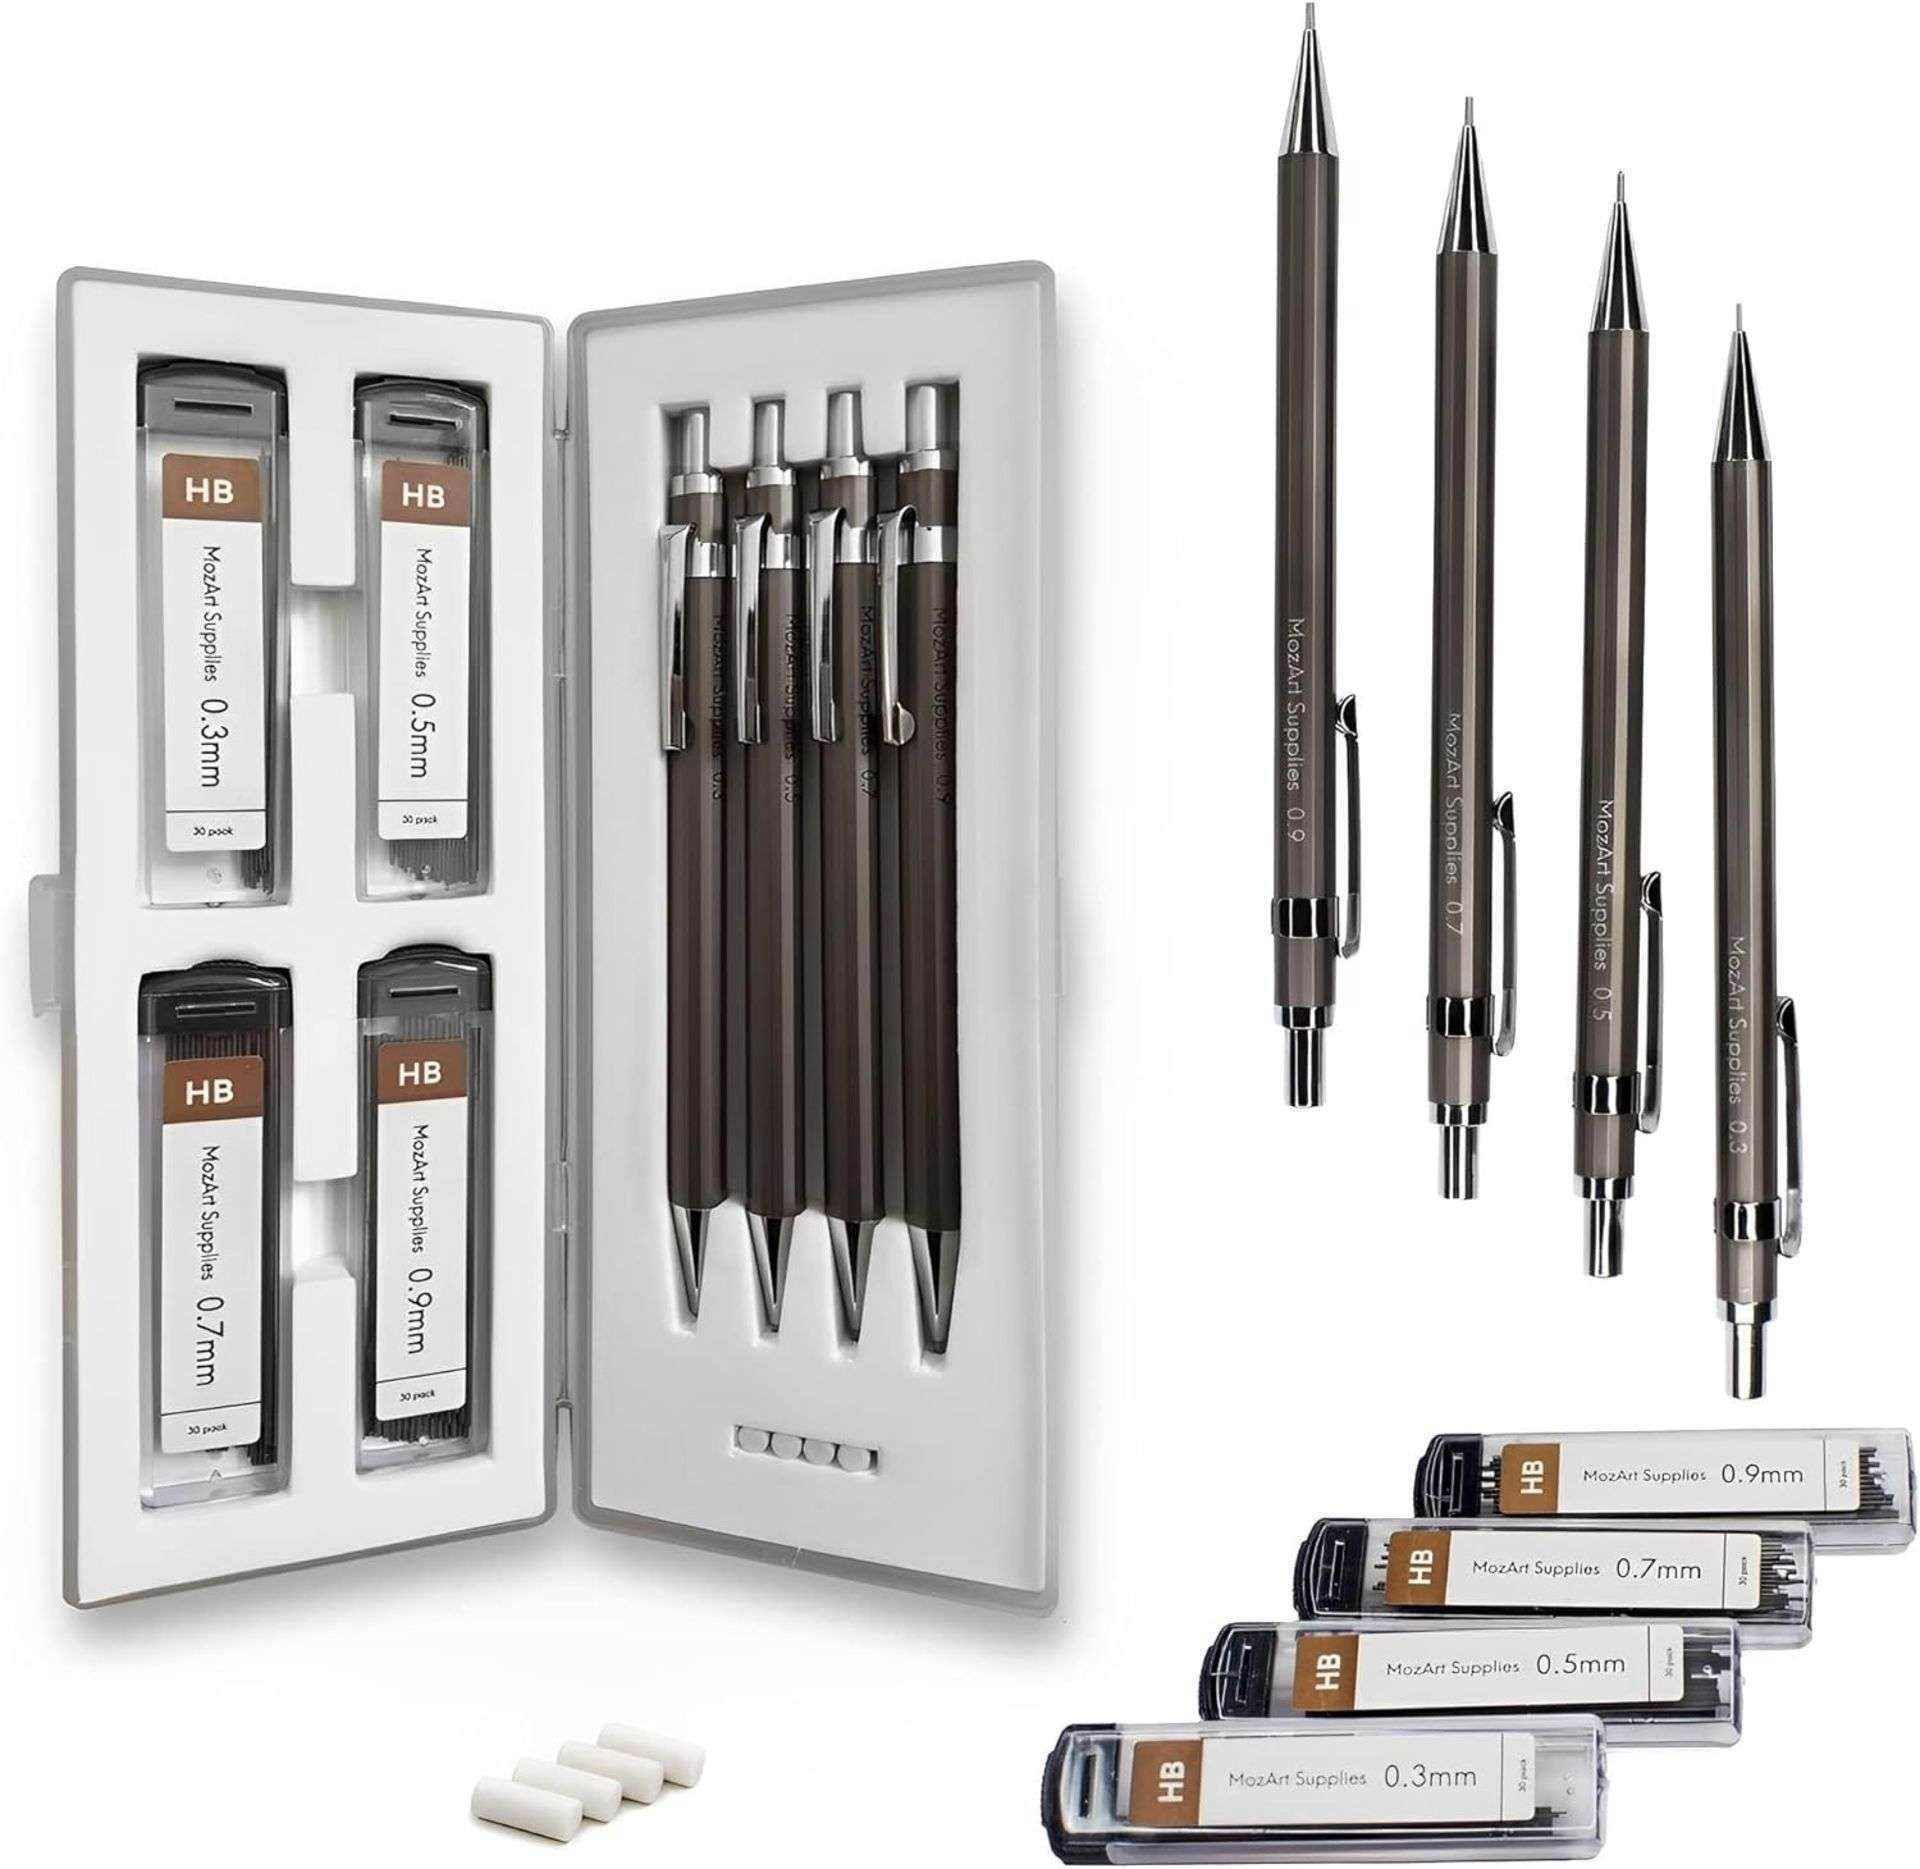 10 X BRAND NEW MOZART MECHANICAL PENCIL SETS WITH CASE RRP £21 EACH 17.8